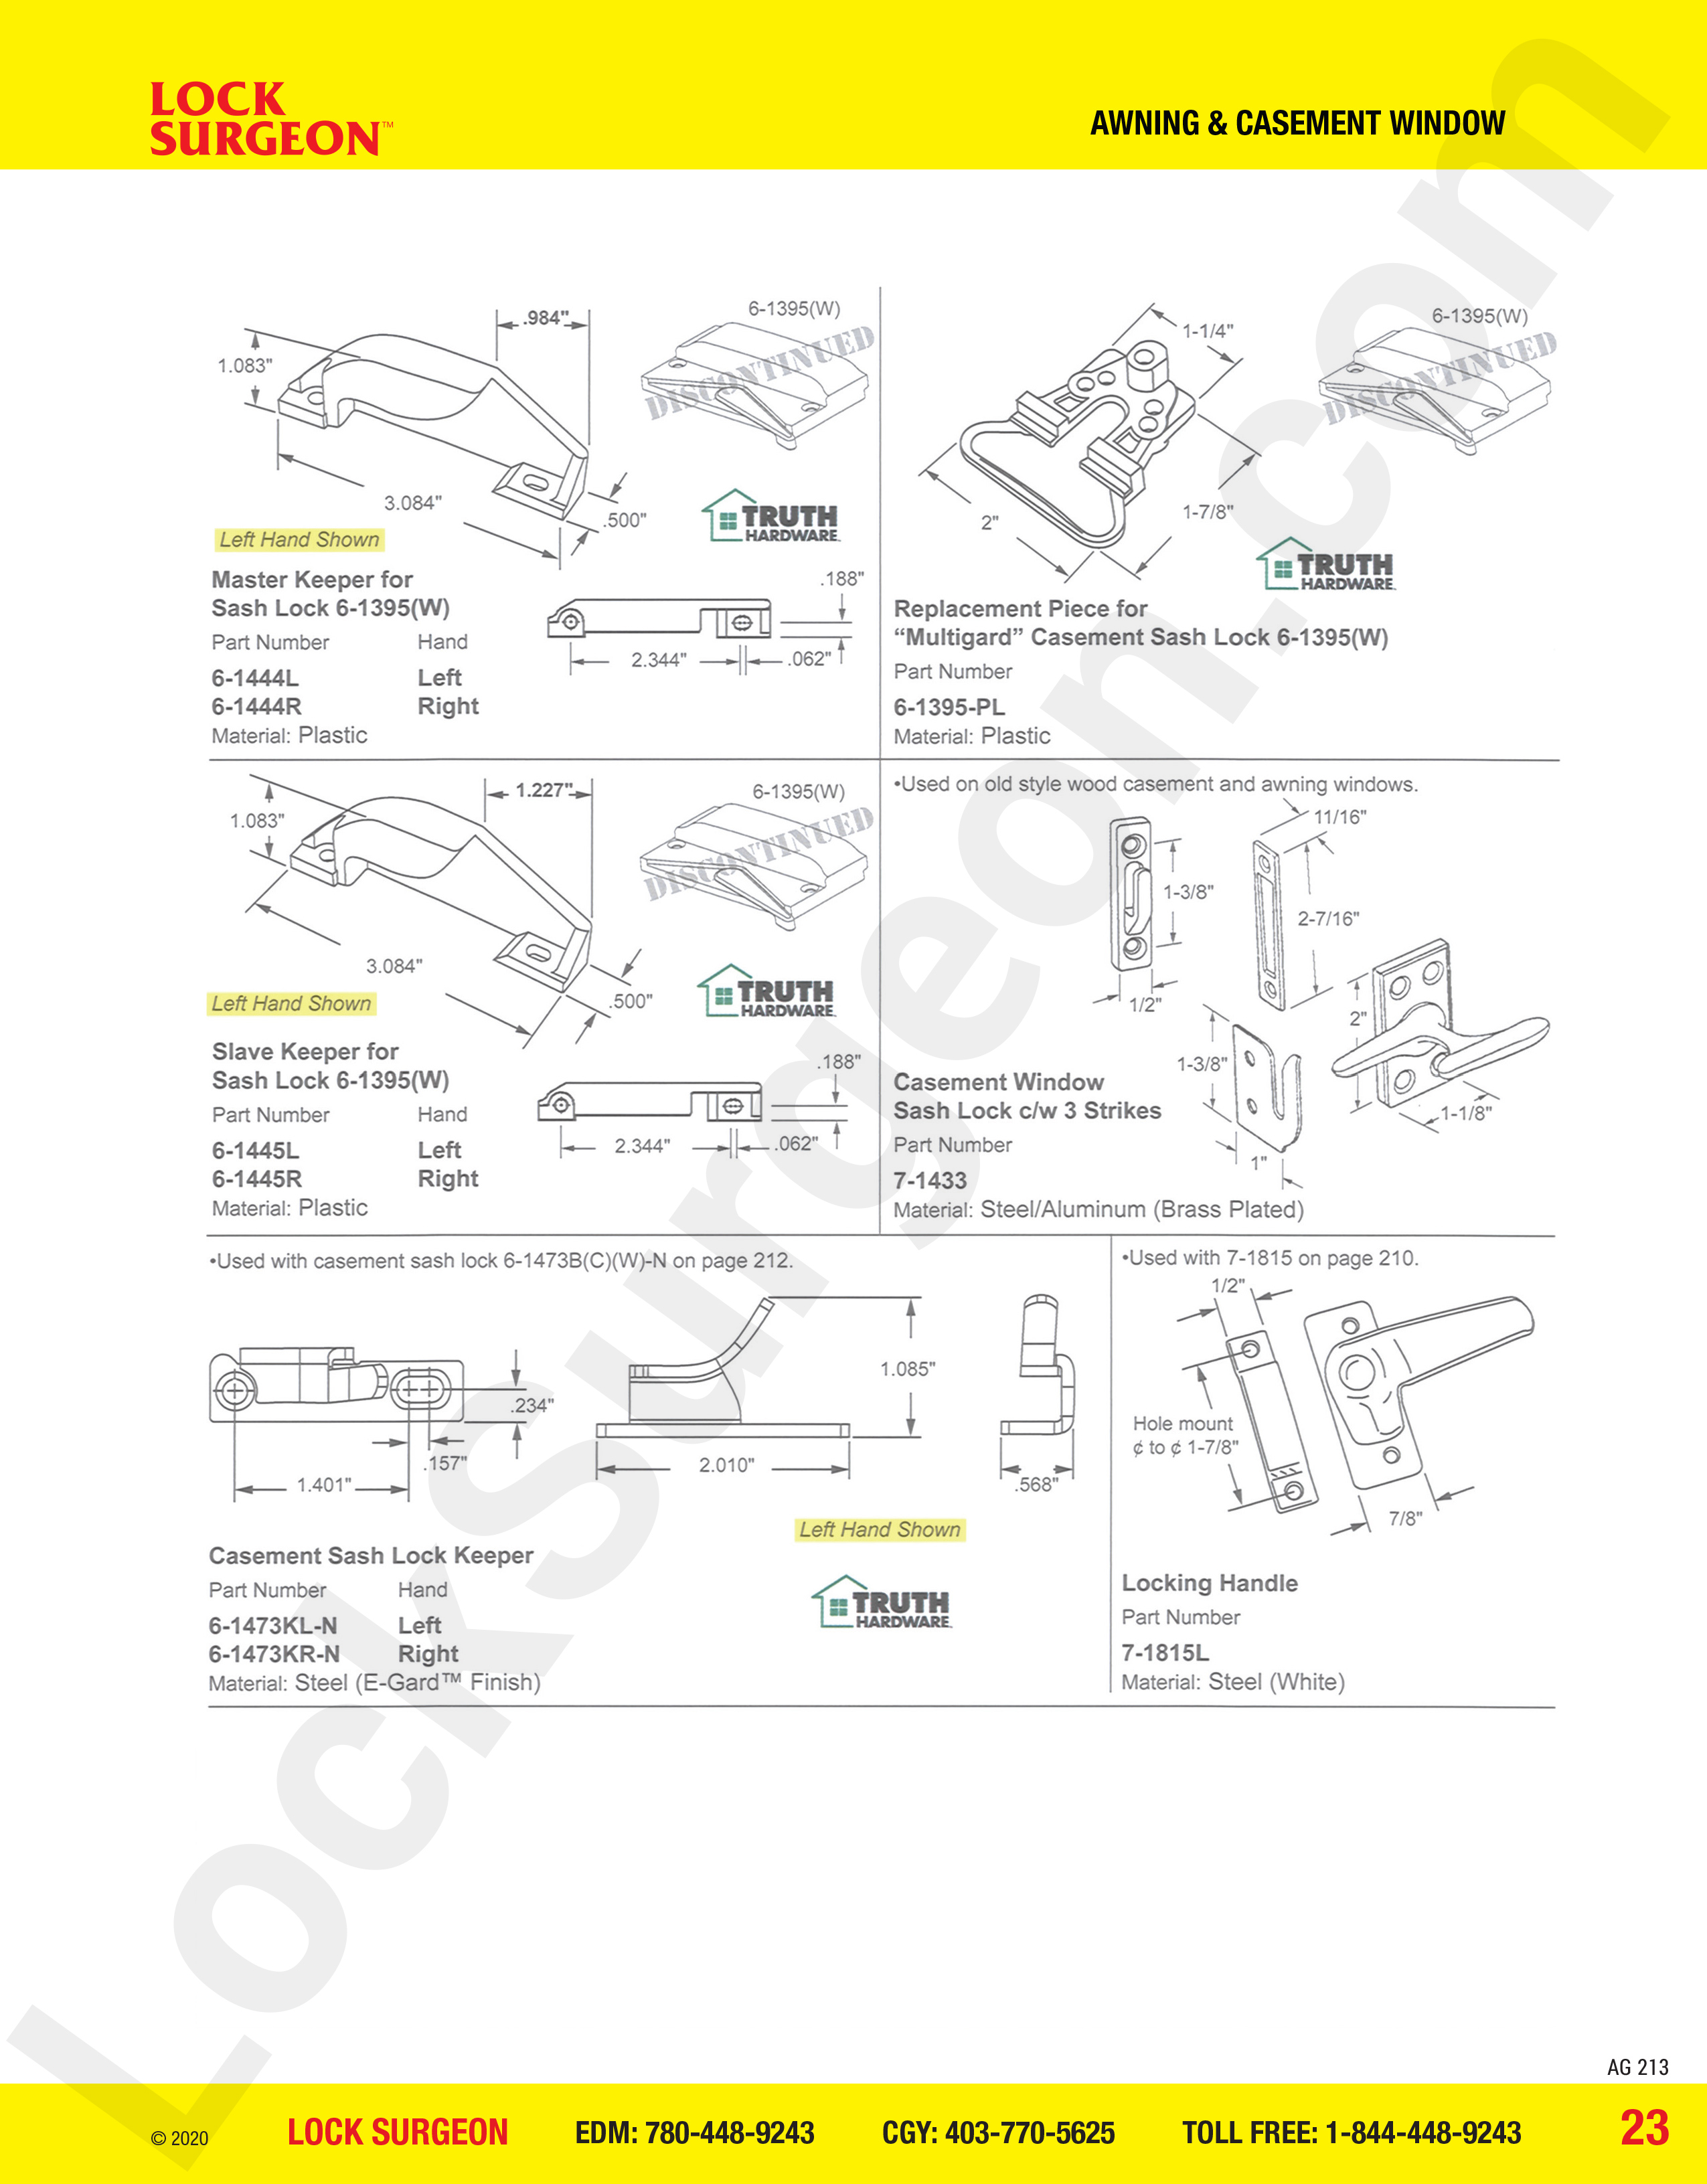 Master keeper for window sash lock replacement piece for Multigard & slave-keeper window sash lock.